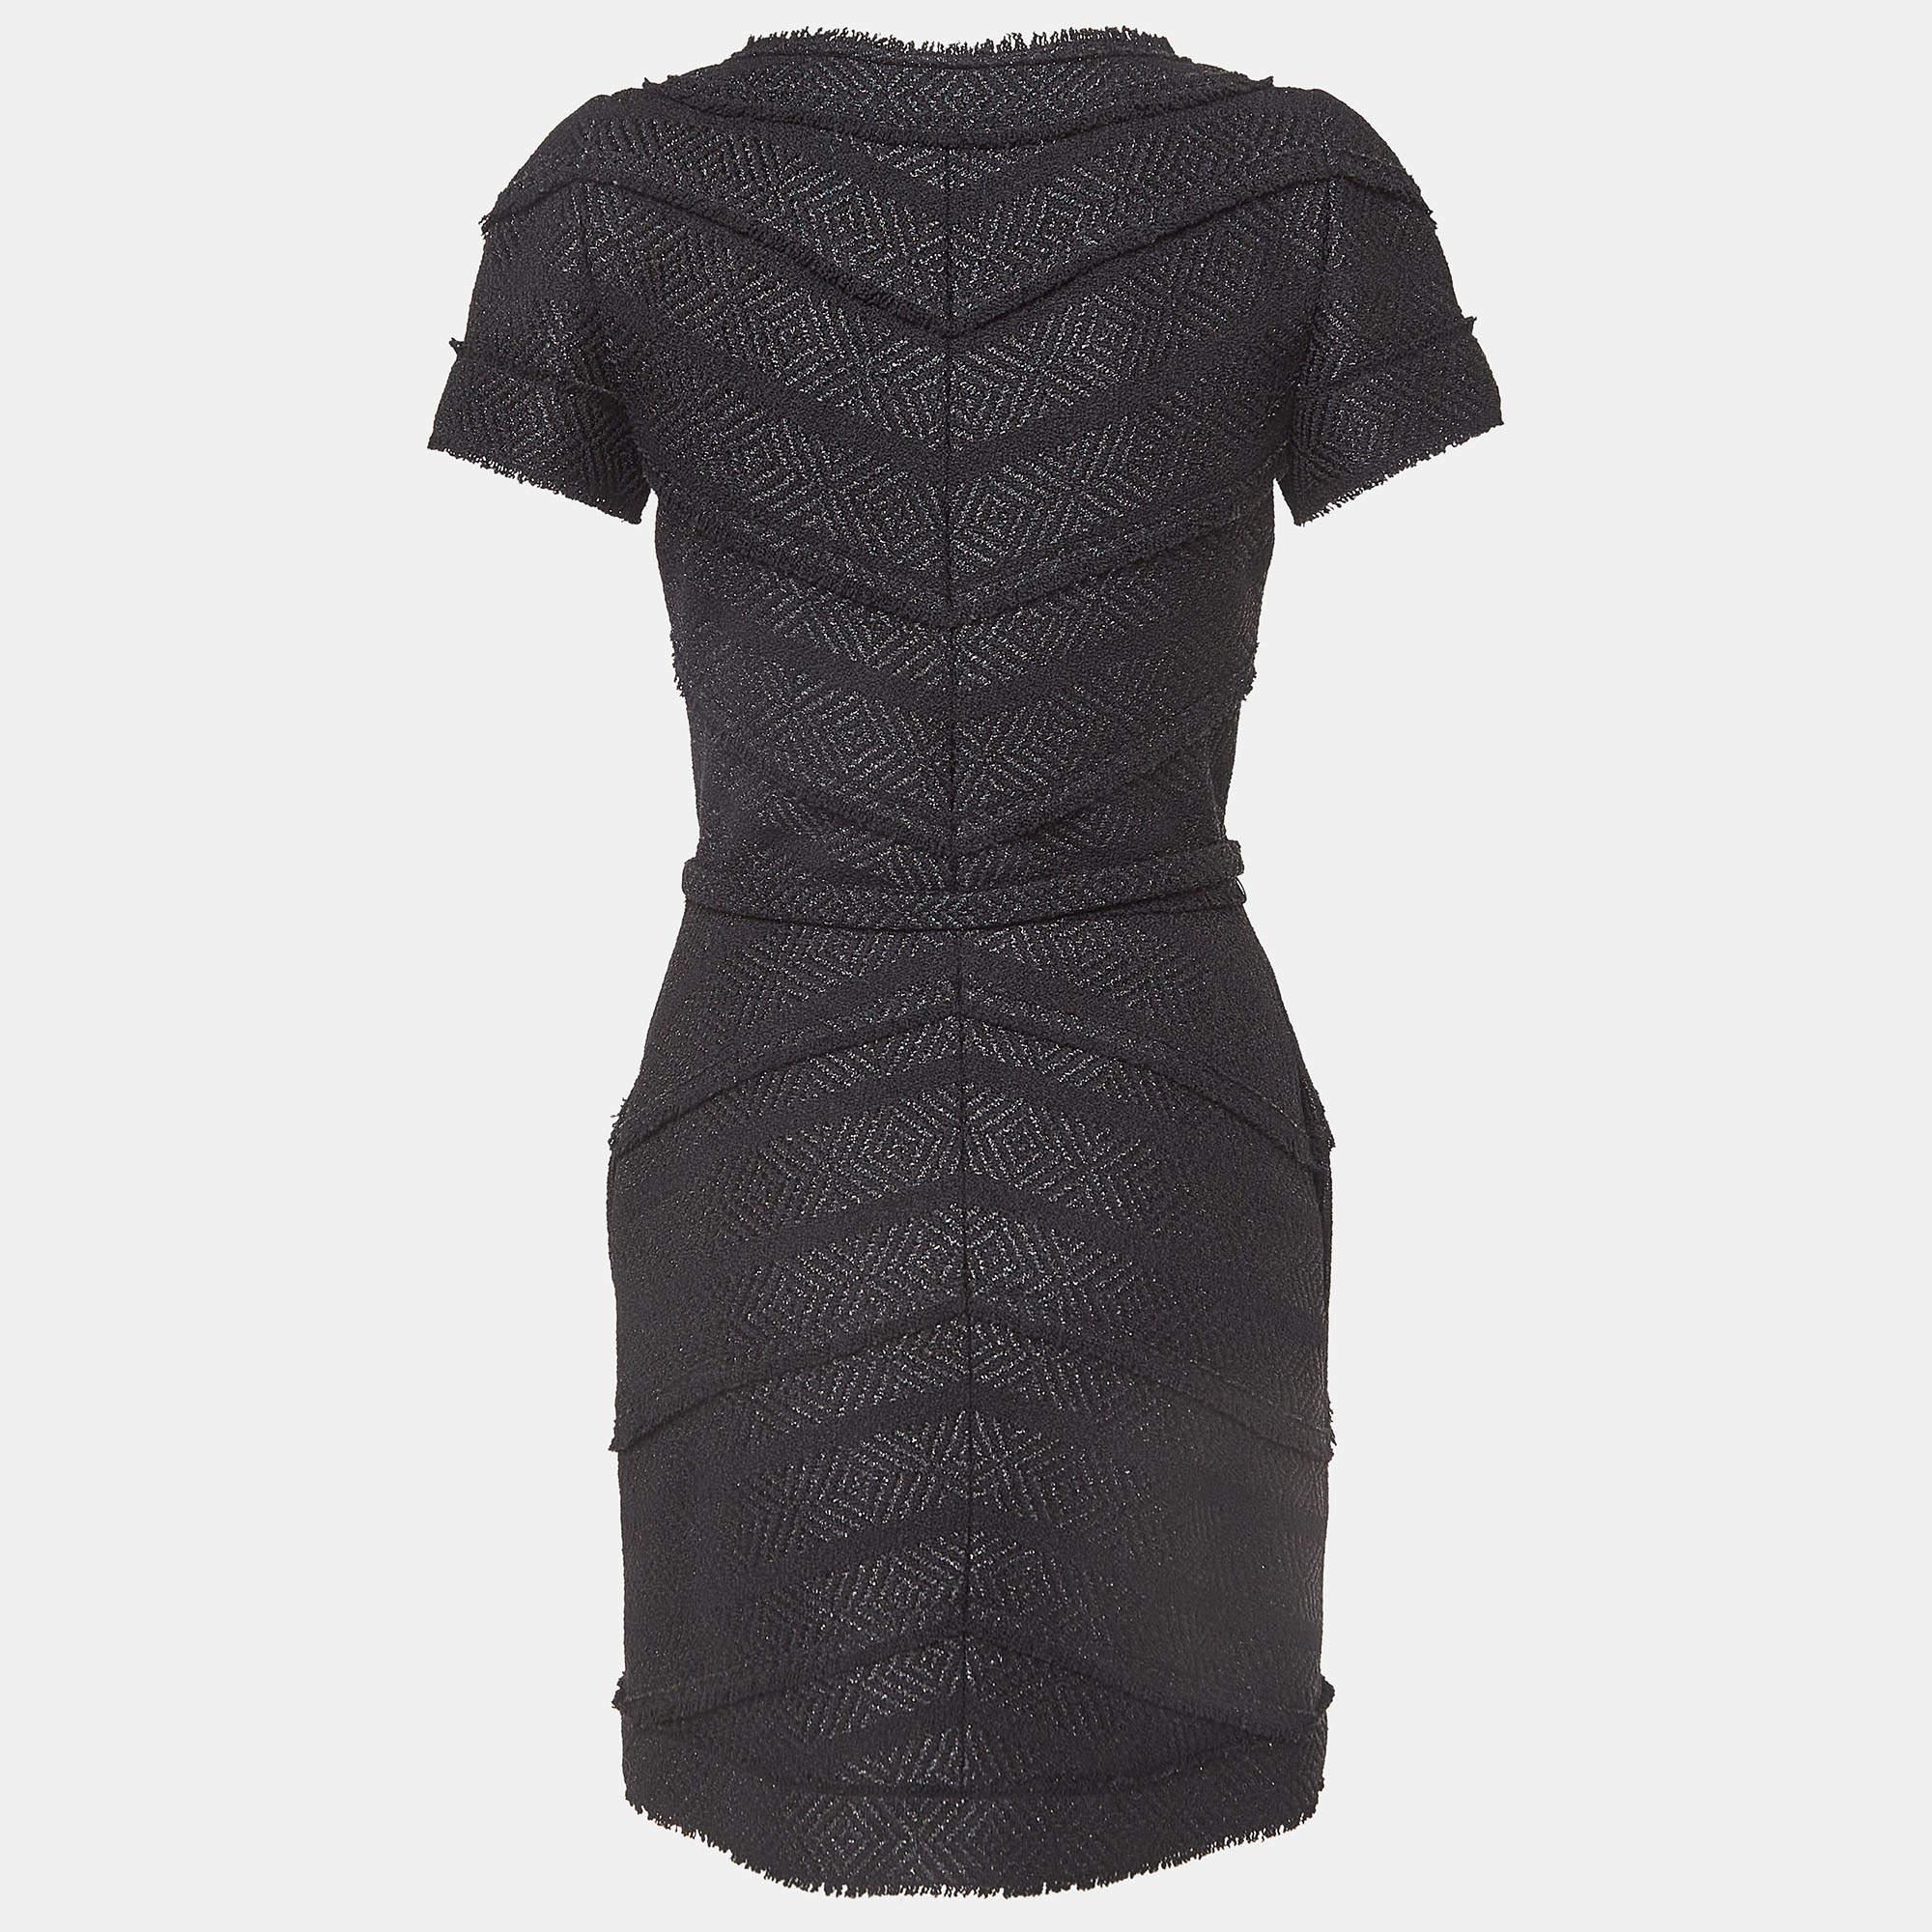 This Chanel tweed dress is a chic and stylish garment that exudes elegance and sophistication. With its sleek design, flattering silhouette, and high-quality craftsmanship, this dress is perfect for any special occasion or evening event, ensuring